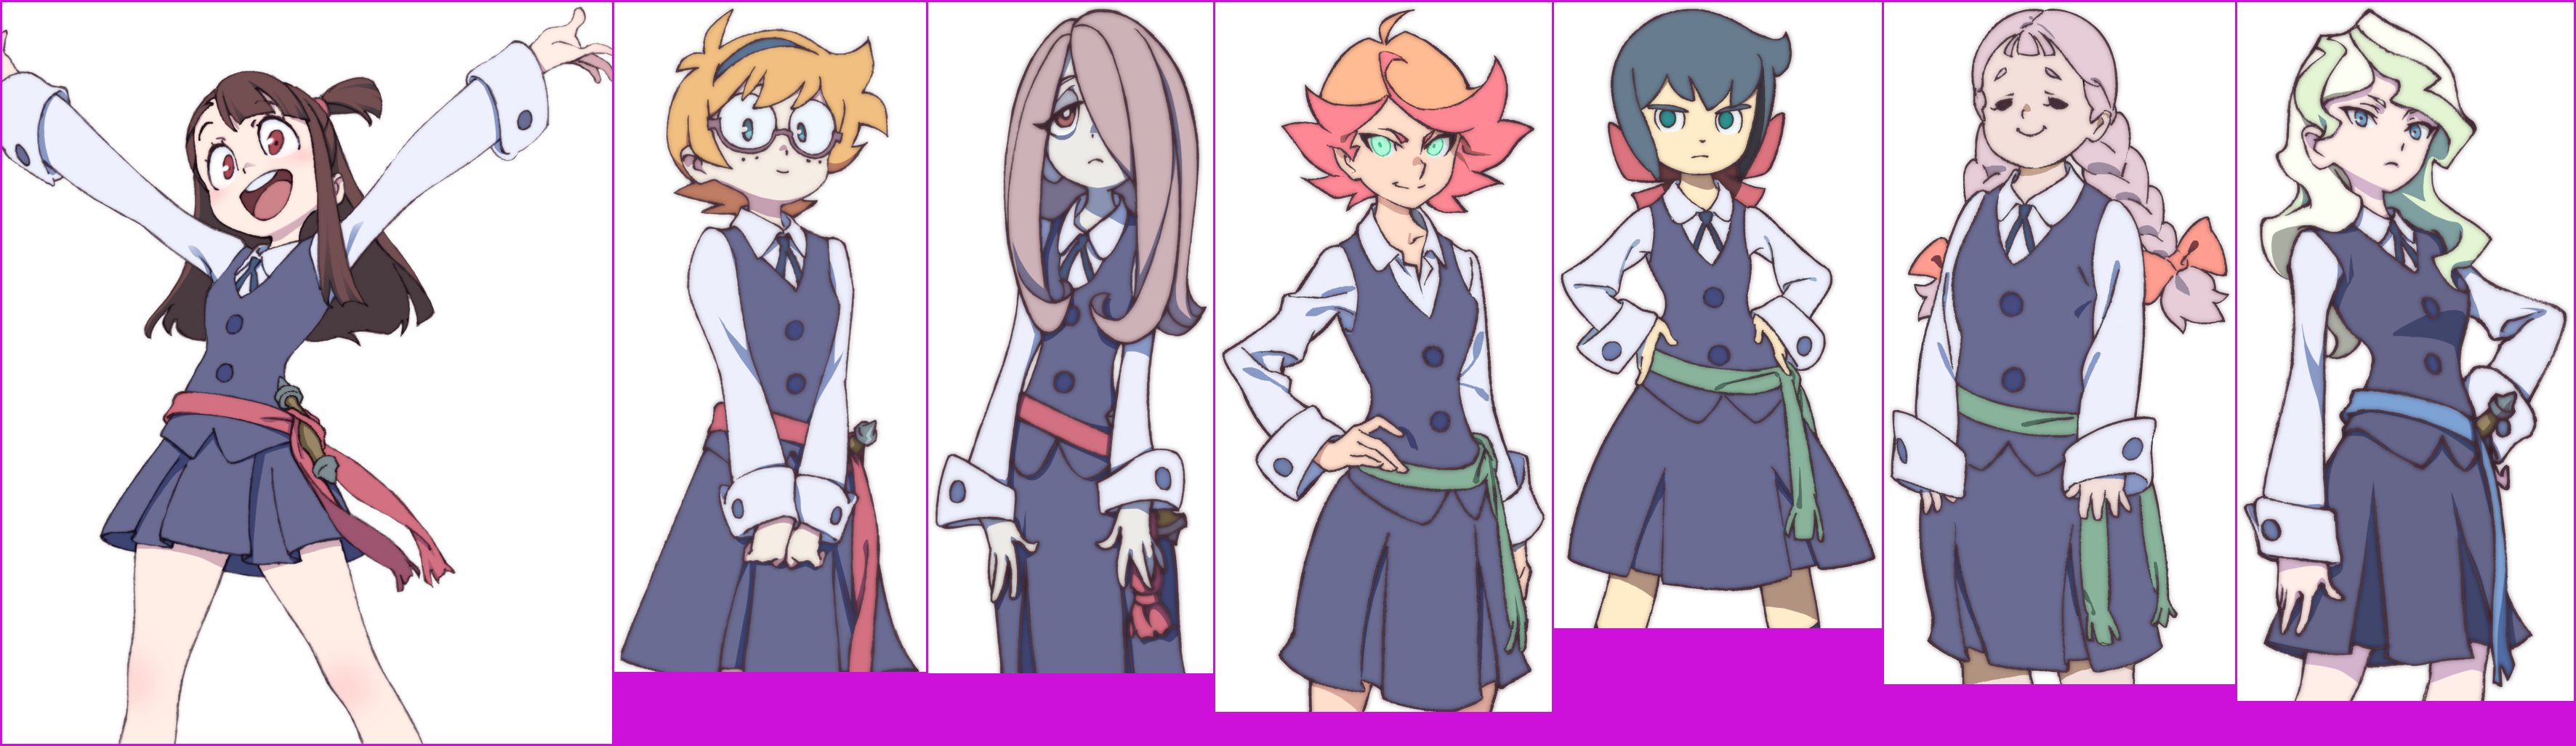 Little Witch Academia: Chamber of Time - Stats Menu Portraits